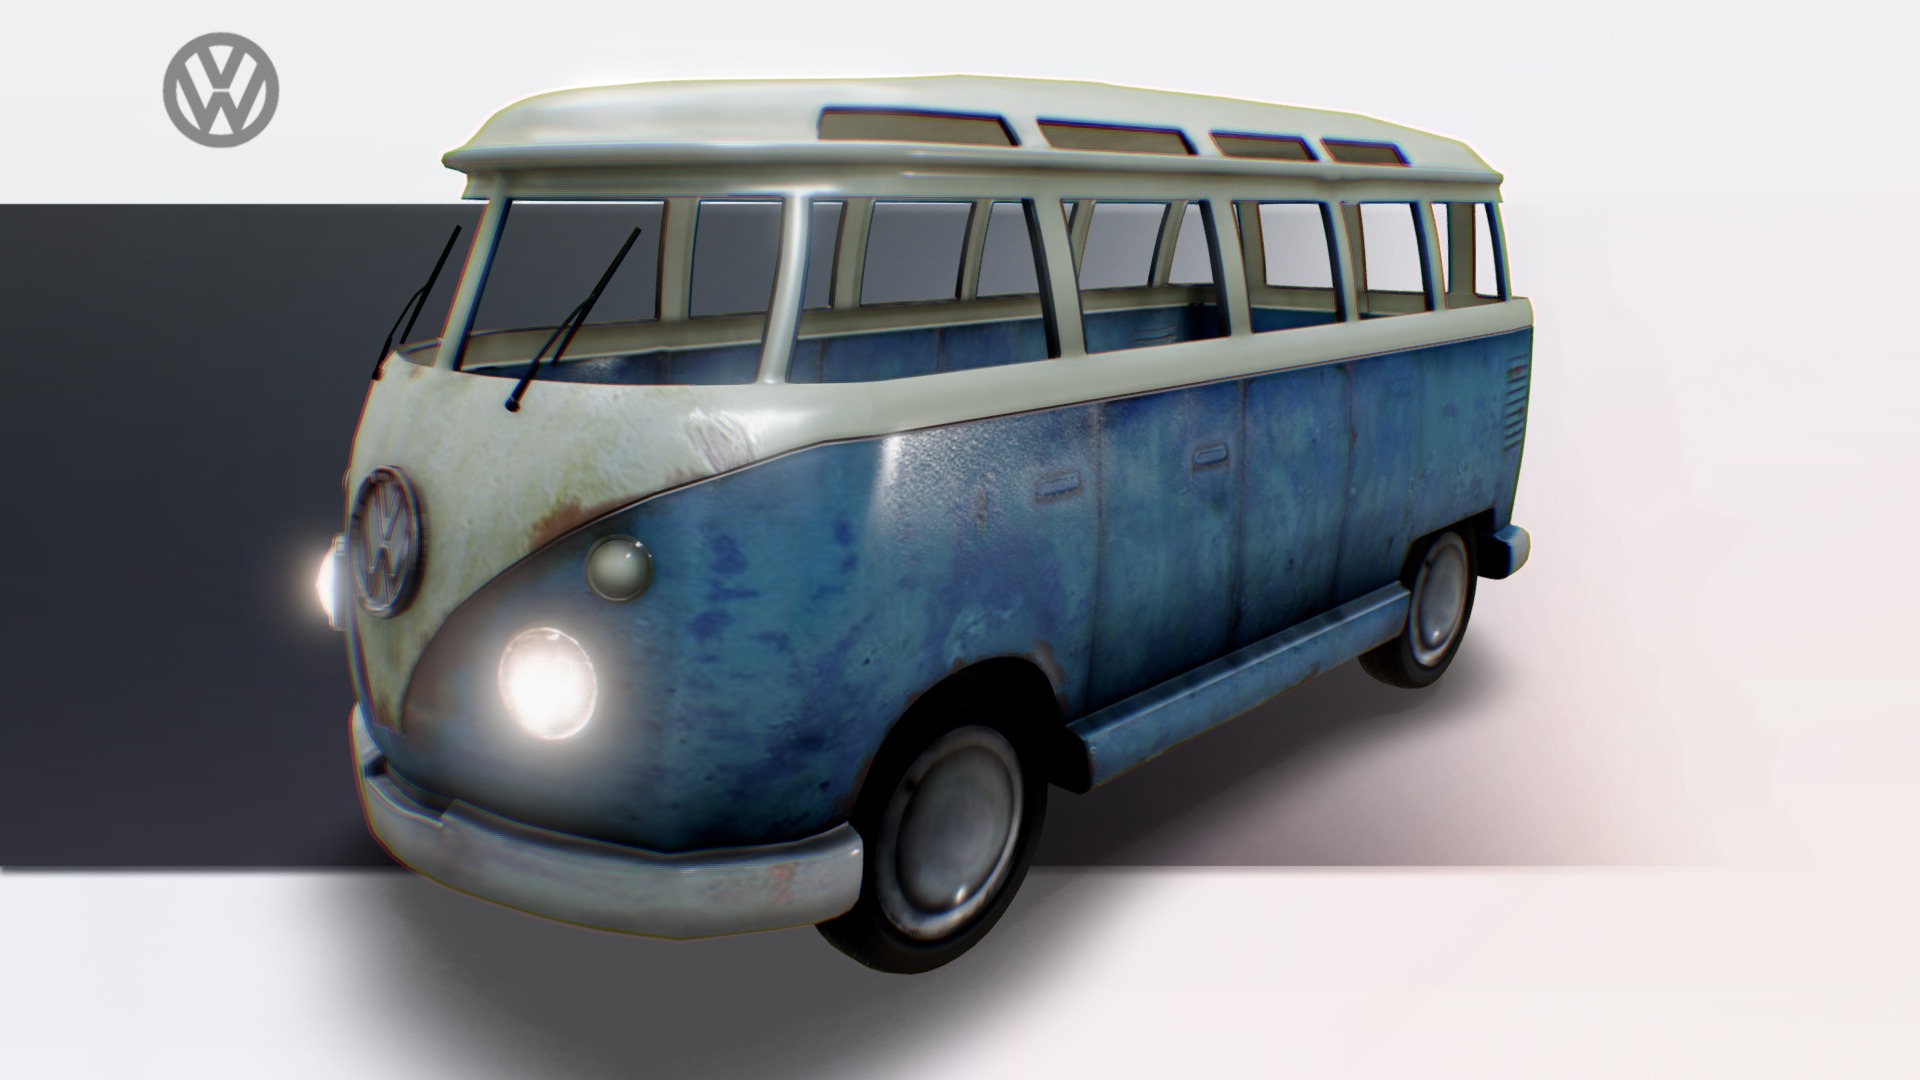 3D model VW Camper  – Samba - This is a 3D model of the VW Camper  - Samba. The 3D model is about a blue and white bus.